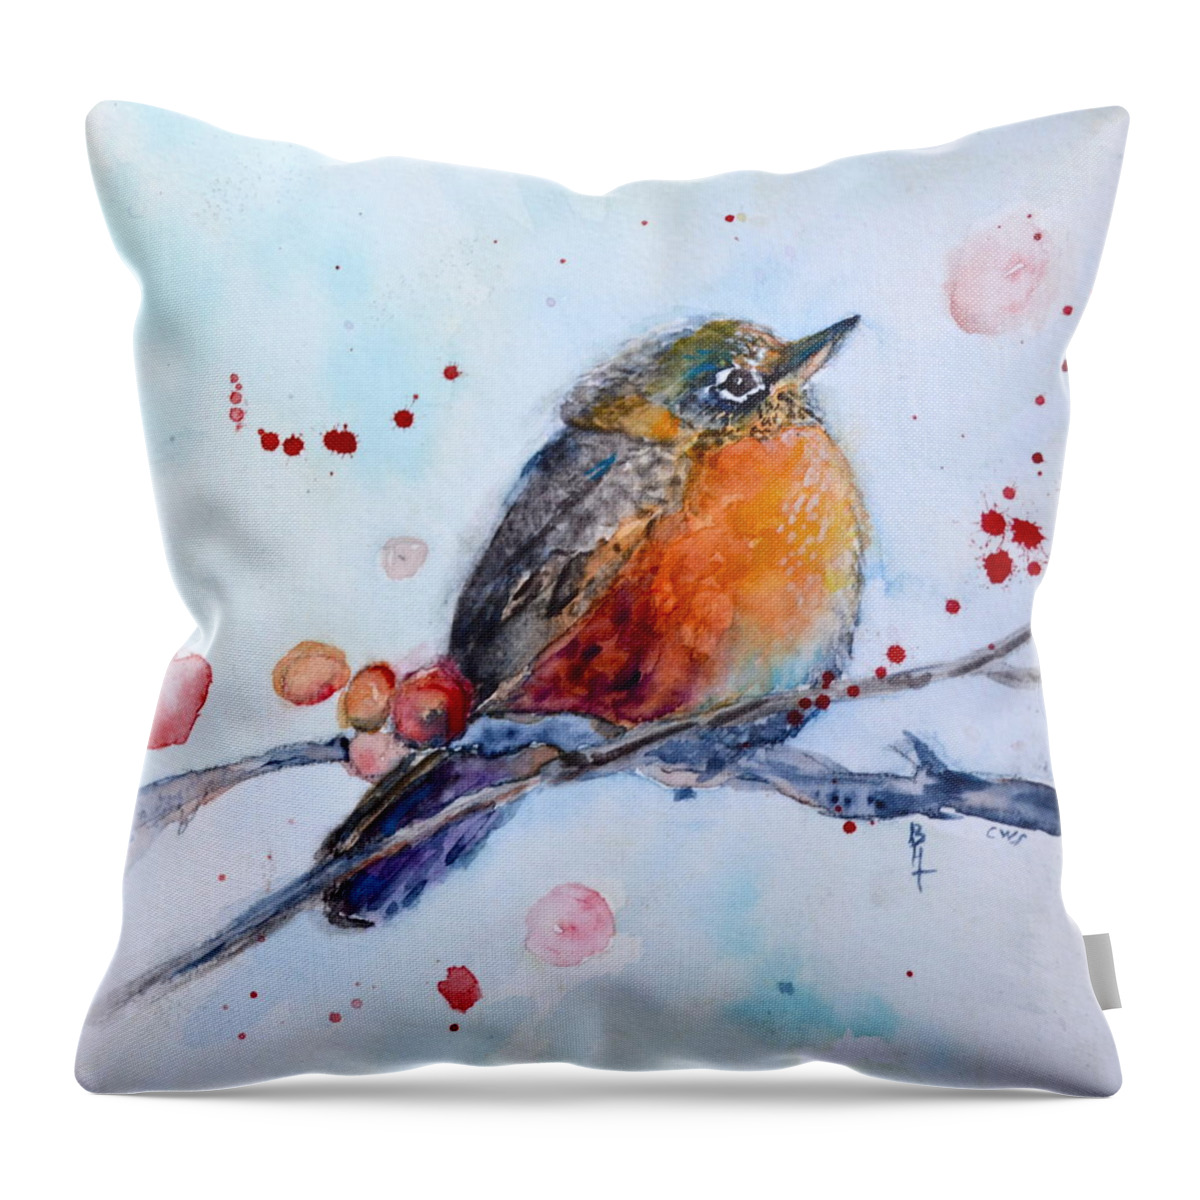 Young Robin Throw Pillow featuring the painting Young Robin by Beverley Harper Tinsley